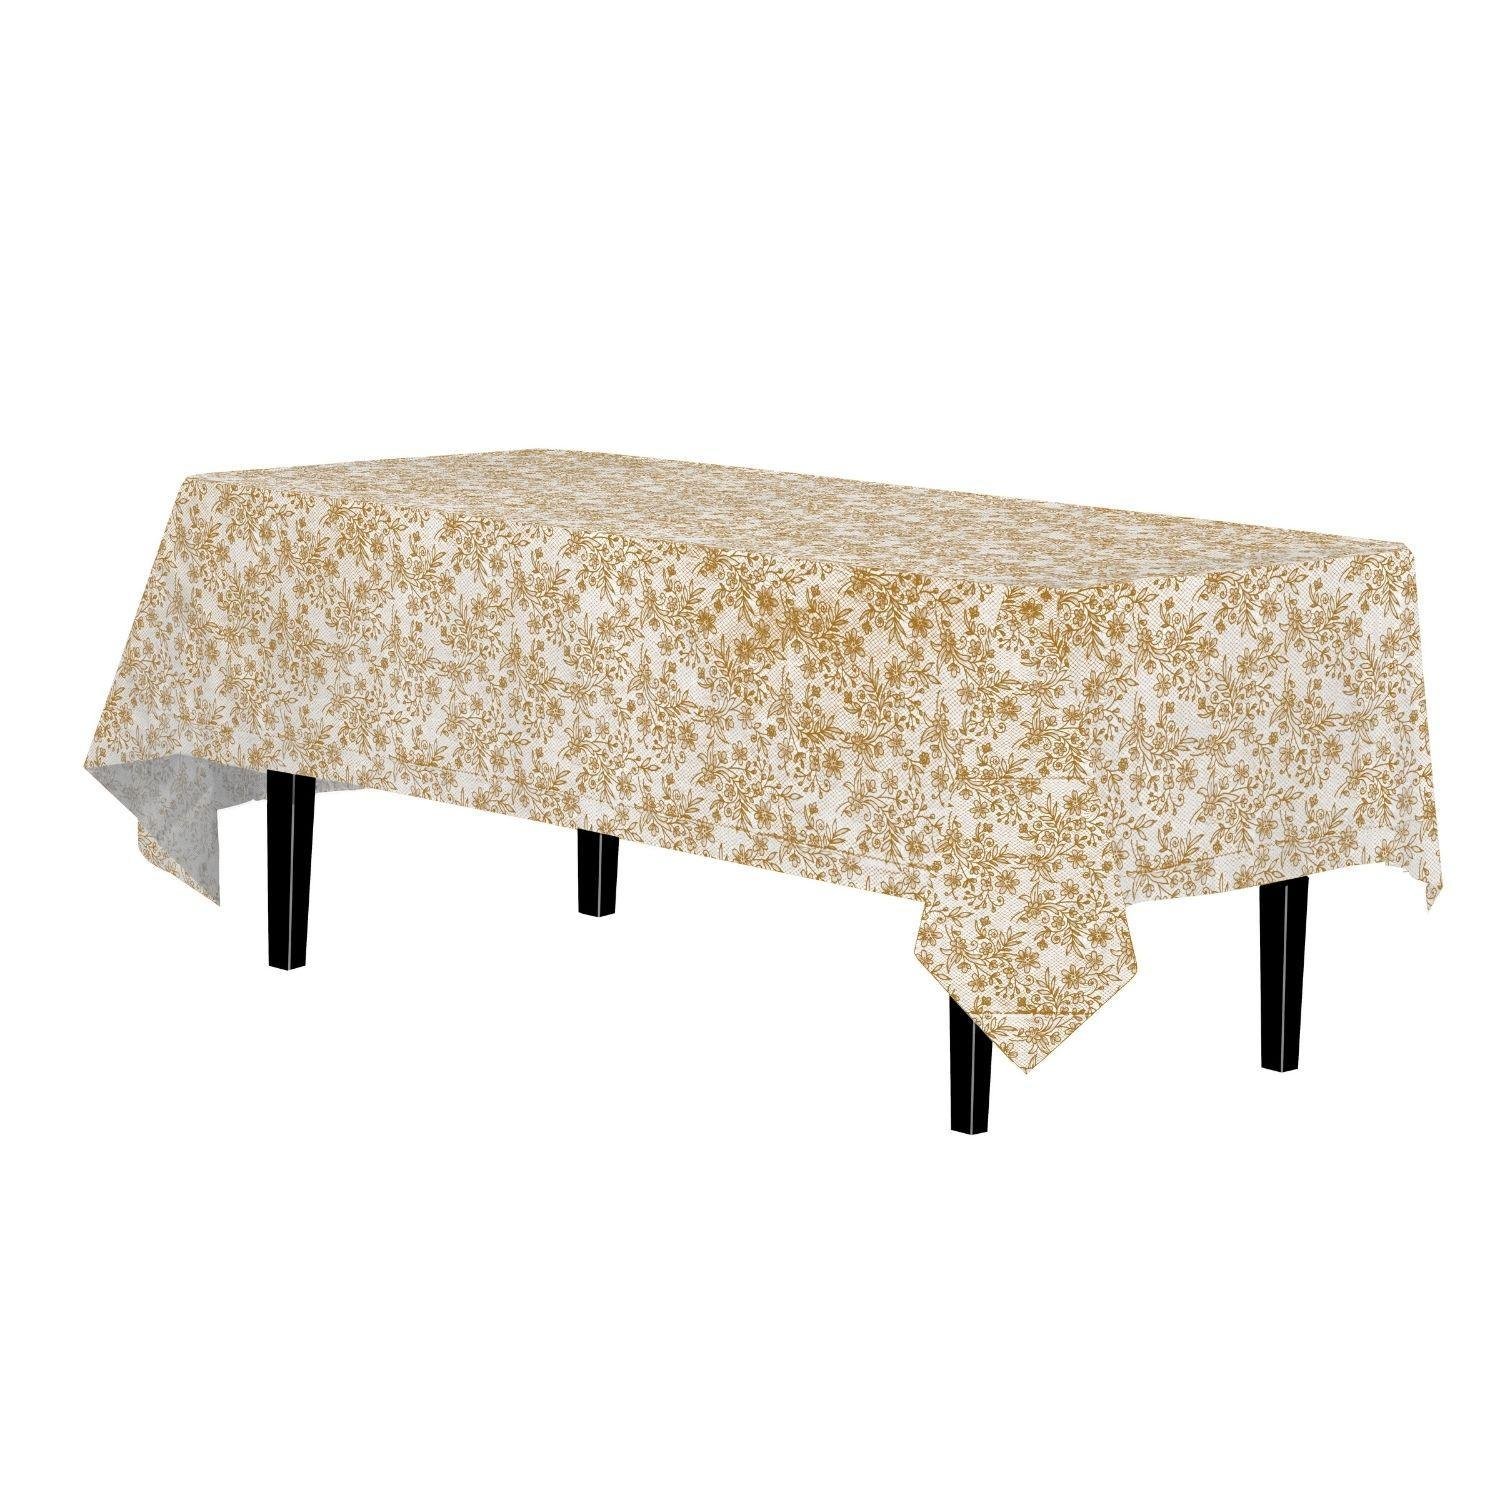 54in. x 108in. Printed Plastic Table cover Gold Floral - 48 ct.